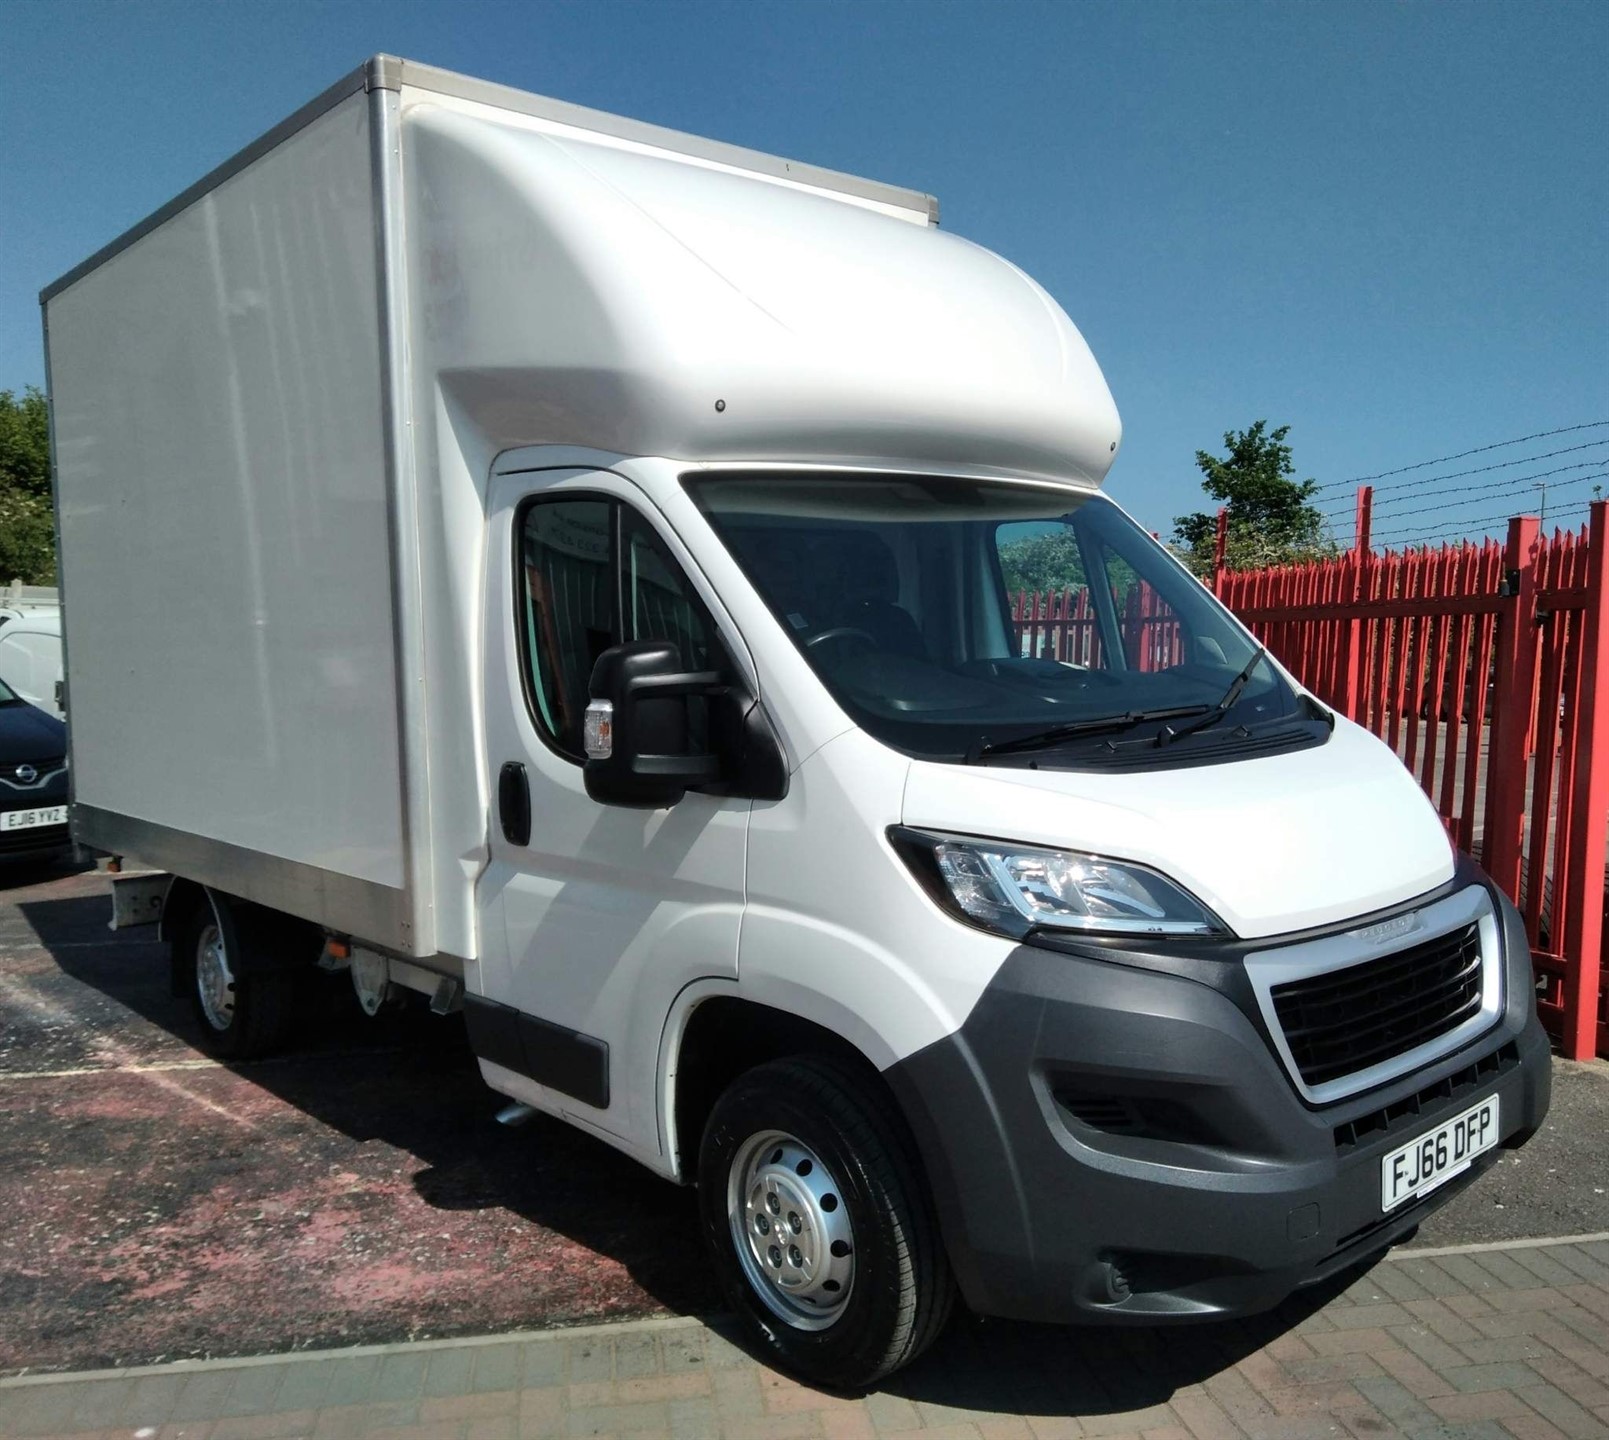 Used Peugeot Boxer for sale in Bristol, Gloucestershire